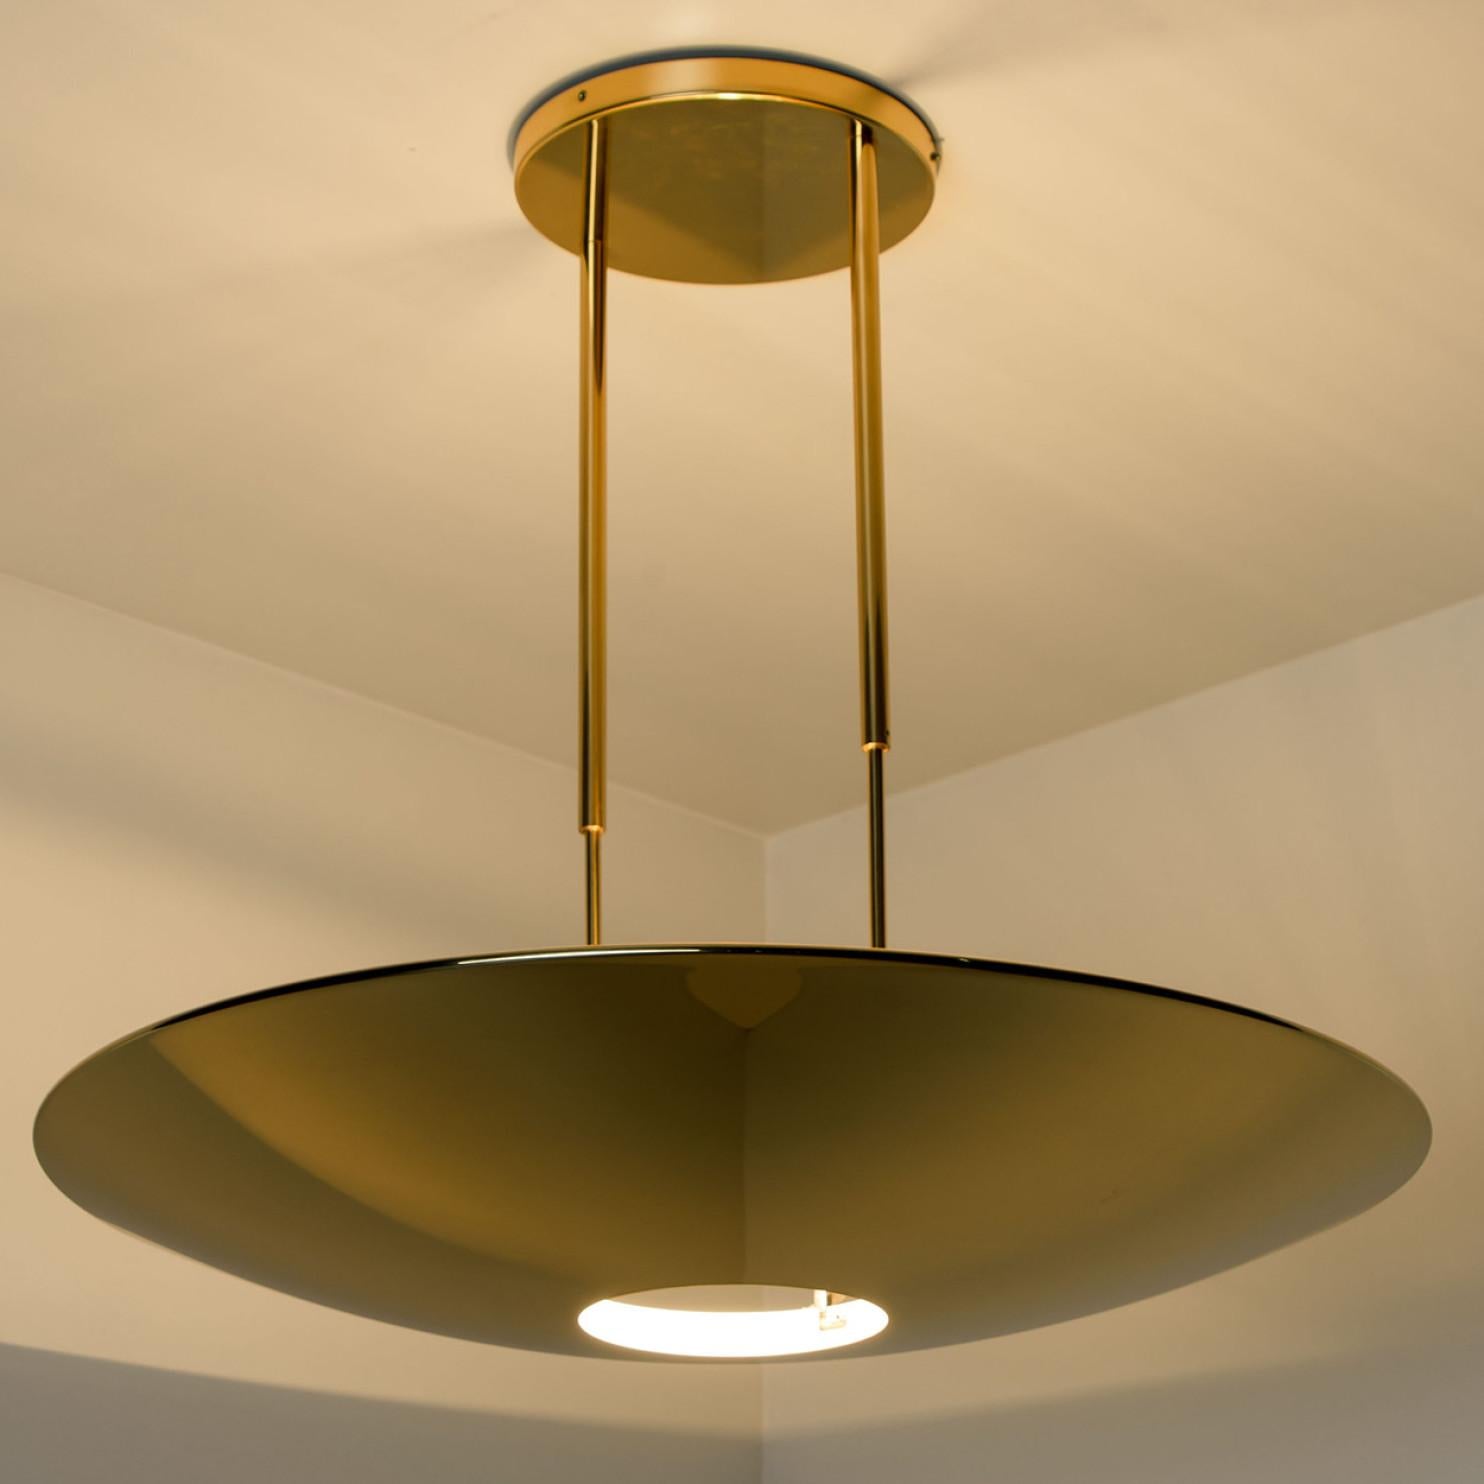 Other Florian Schulz 'Sola 80' Brass Pendant Lamp or Ceiling Fixture